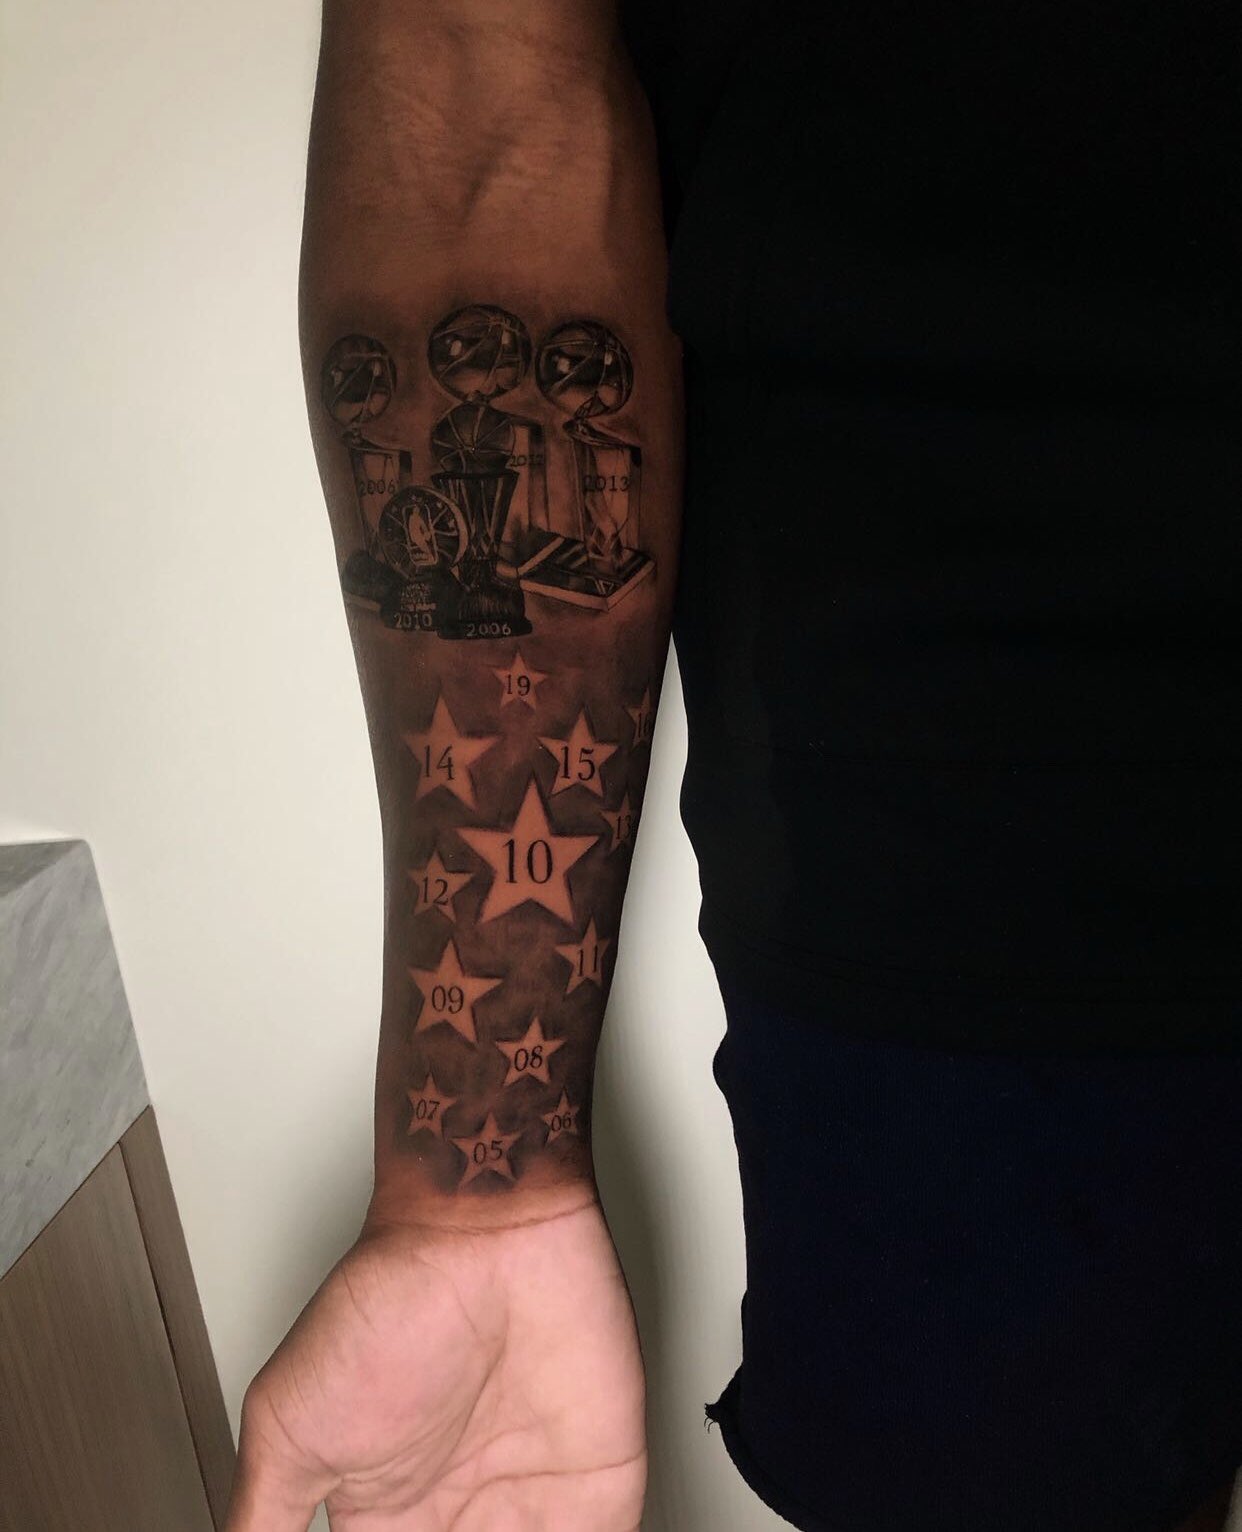 Dwyane Wade gets Miami Heat tattoo Former LeBron James teammate gets  incredible artwork imprinted on his body describing his basketball journey   The SportsRush